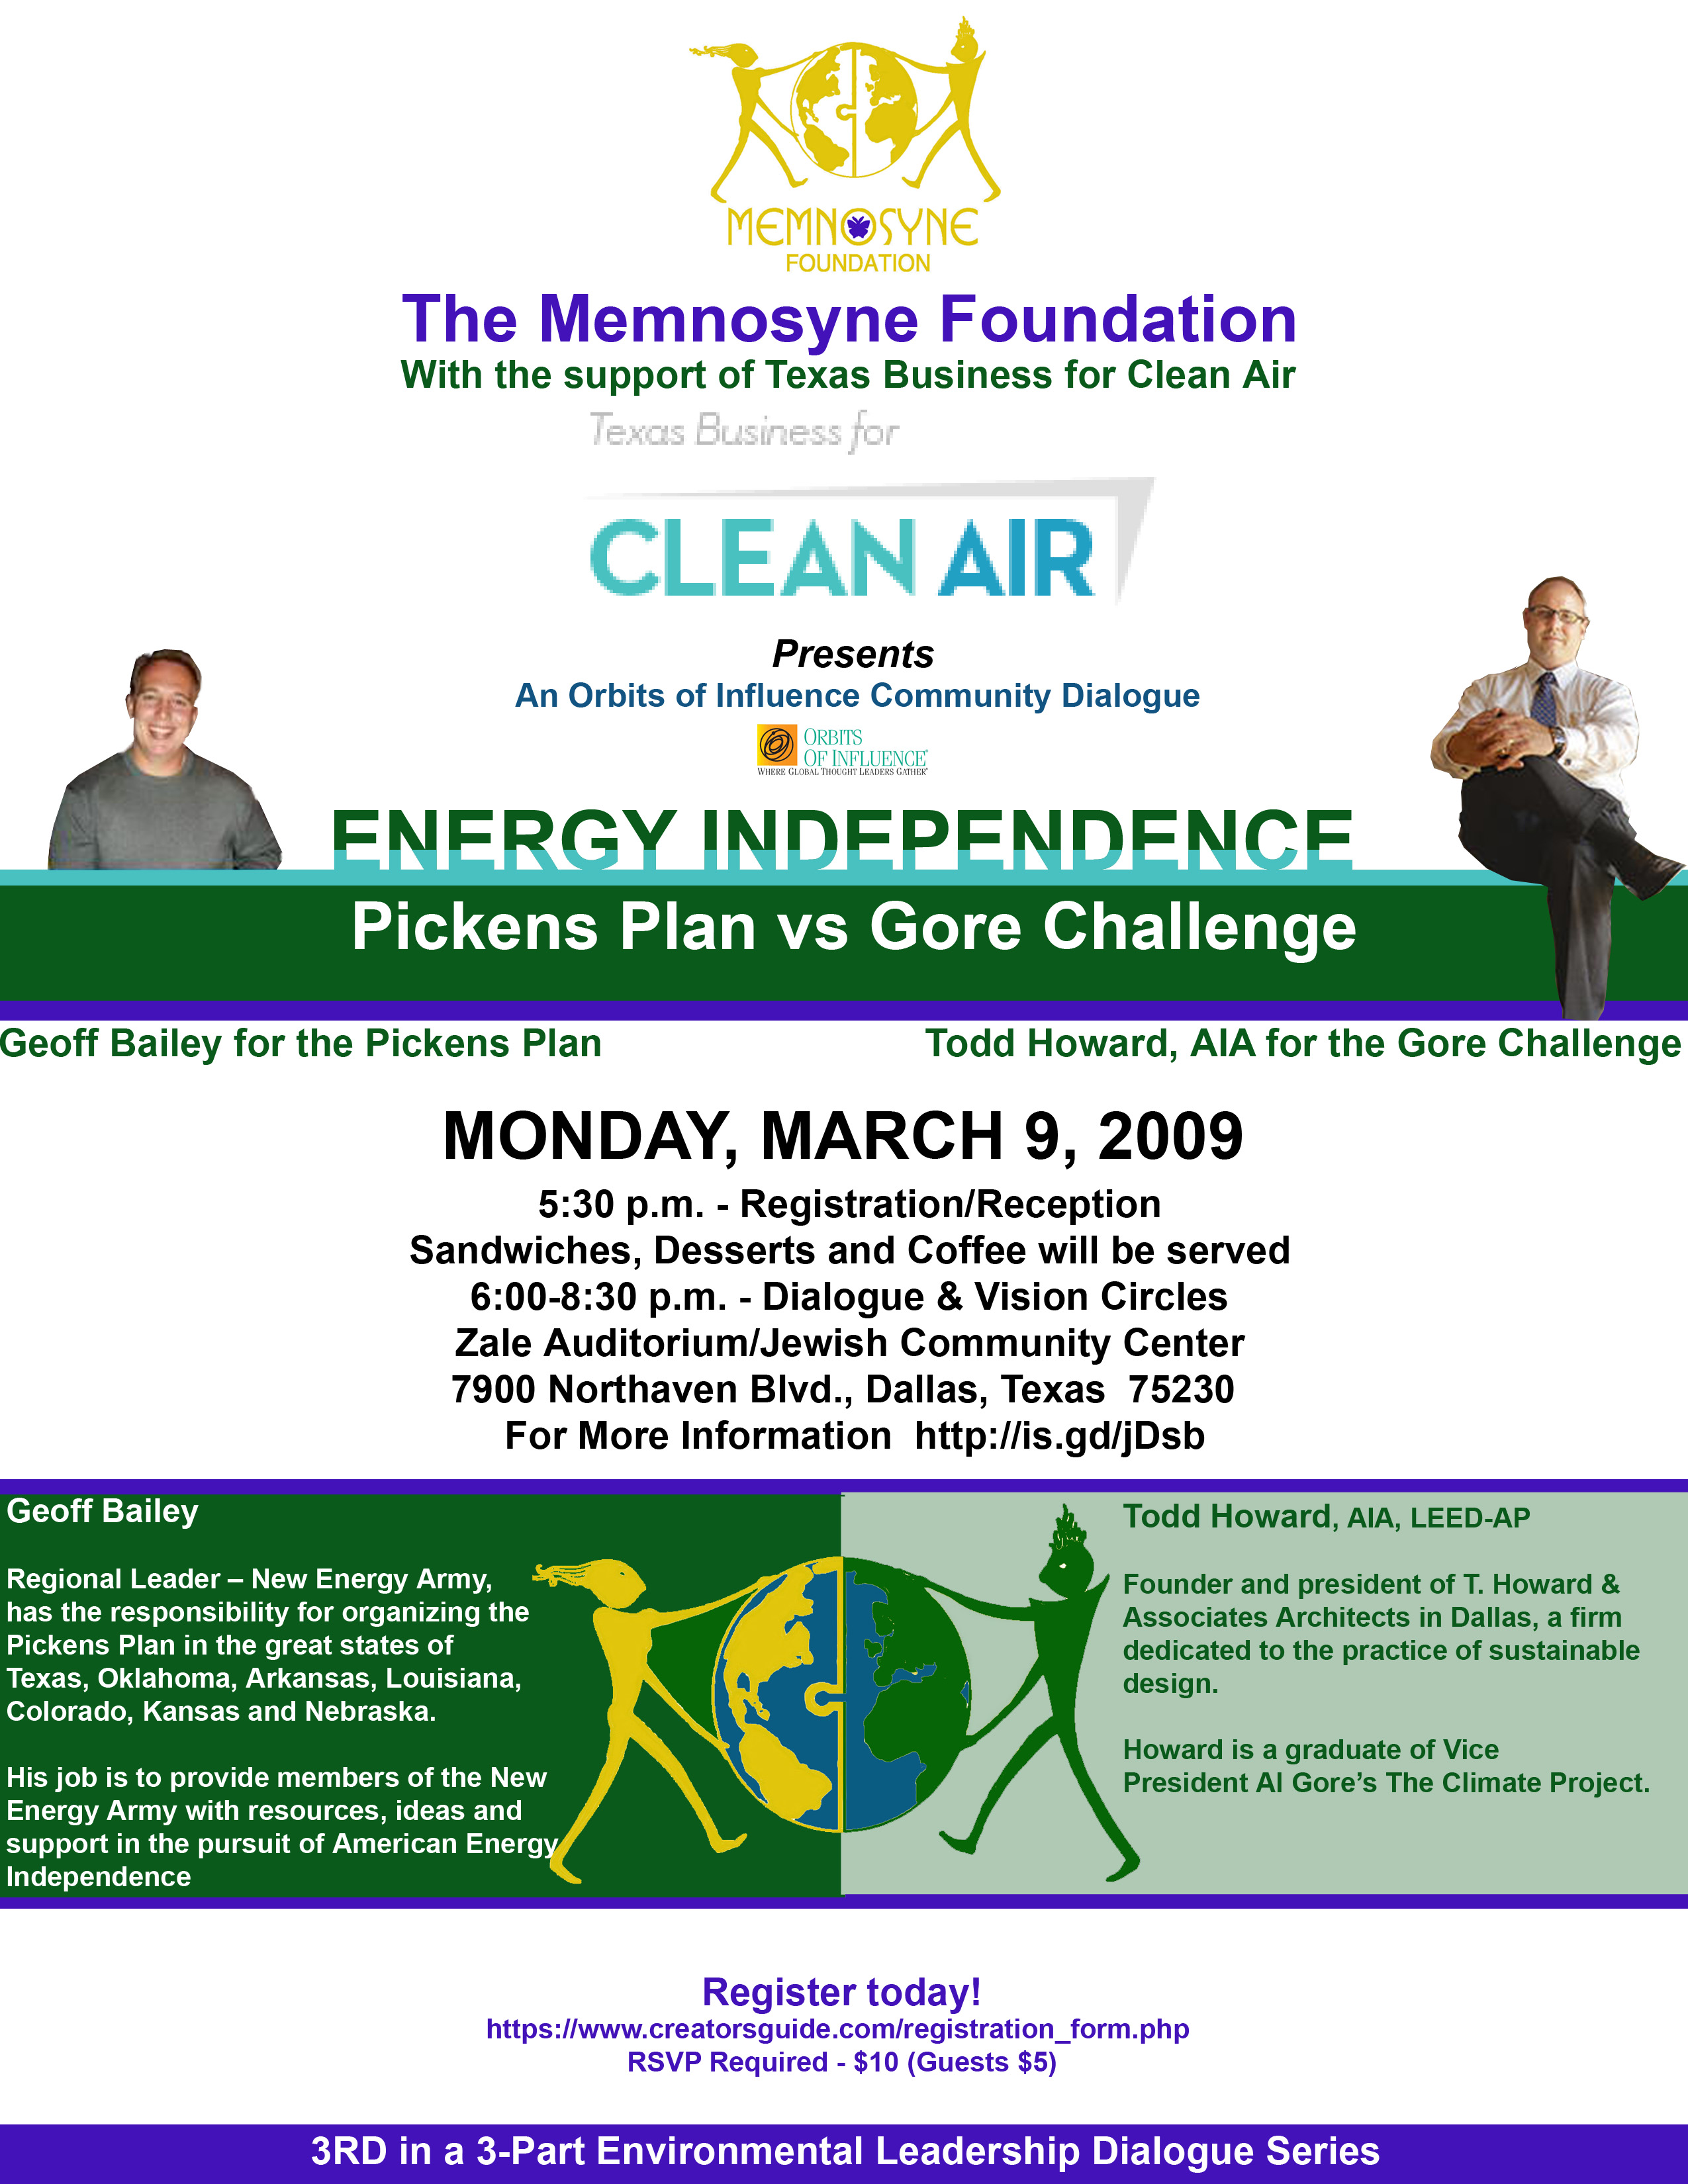 The Memnosyne FoundationWith the support of Texas Business for Clean AirPresents An Orbits of Influence Community DialogueENERGY INDEPENDENCE:  Pickens Plan vs Gore ChallengeGeoff Bailey for the Pickens PlanTodd Howard, AIA for the Gore ChallengeMONDAY, MARCH 9, 20095:30 p.m. - Registration/ReceptionSandwiches, Desserts and Coffee will be served6:00-8:30 p.m. - Dialogue & Vision CirclesZale Auditorium/Jewish Community Center7900 Northaven Blvd., Dallas, Texas  75230  For More Information  http://is.gd/jDsbRegister todayhttps://www.creatorsguide.com/registration_form.php RSVP Required - $10 (Guests $5)Geoff Bailey, Regional Leader – New Energy Army, has responsibility for organizing the Pickens Plan in the great states of Texas, Oklahoma, Arkansas, Louisiana, Colorado, Kansas and Nebraska. His job is to provide members of the New Energy Army with resources, ideas and support in the pursuit of American Energy IndependenceTodd Howard, AIA, LEED-AP is the founder and president of t. howard & associates architects in Dallas, a firm dedicated to the practice of sustainable design. Howard is a graduate of Vice President Al Gore’s The Climate Project.3RD in a 3-Part Environmental Leadership Dialogue Series  